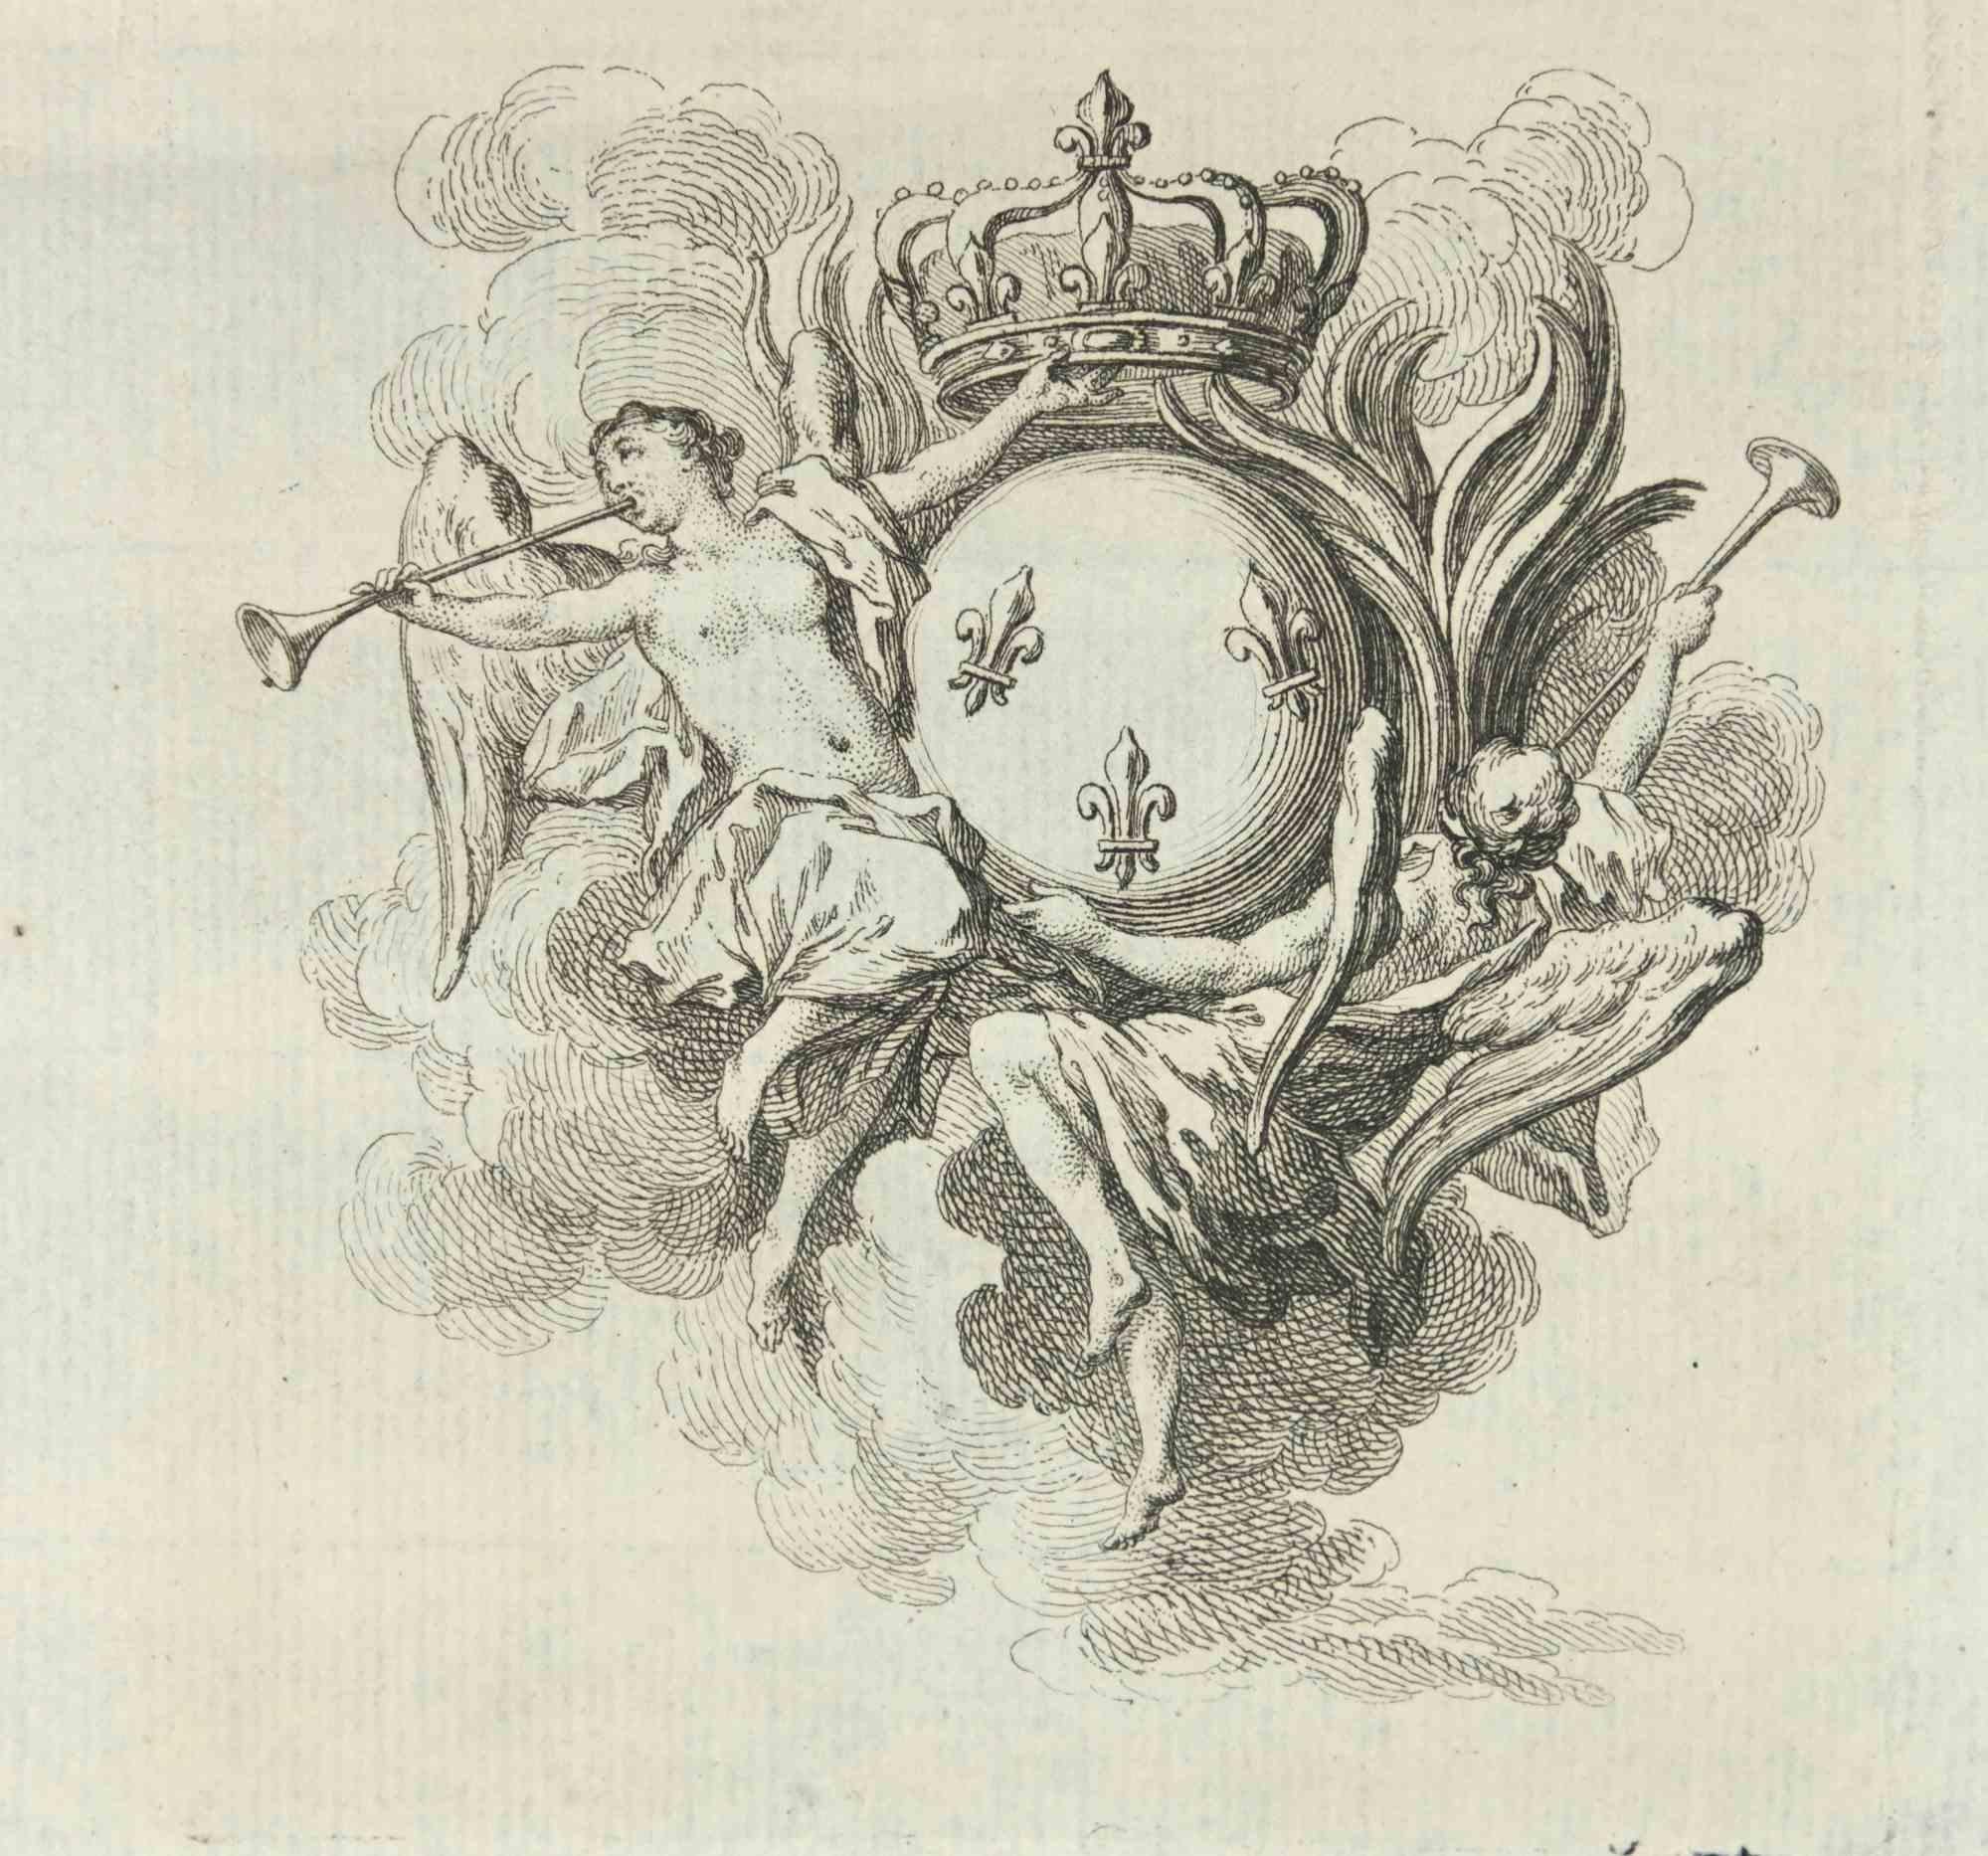 Composition with Angels is an etching realized by Charles-Antoine Jombert in 1755.

Good conditions.

The print was realized for the anatomy study “JOMBERT, Charles-Antoine (1712-1784) - Méthode pour apprendre le dessein, ou l'on donne les regles